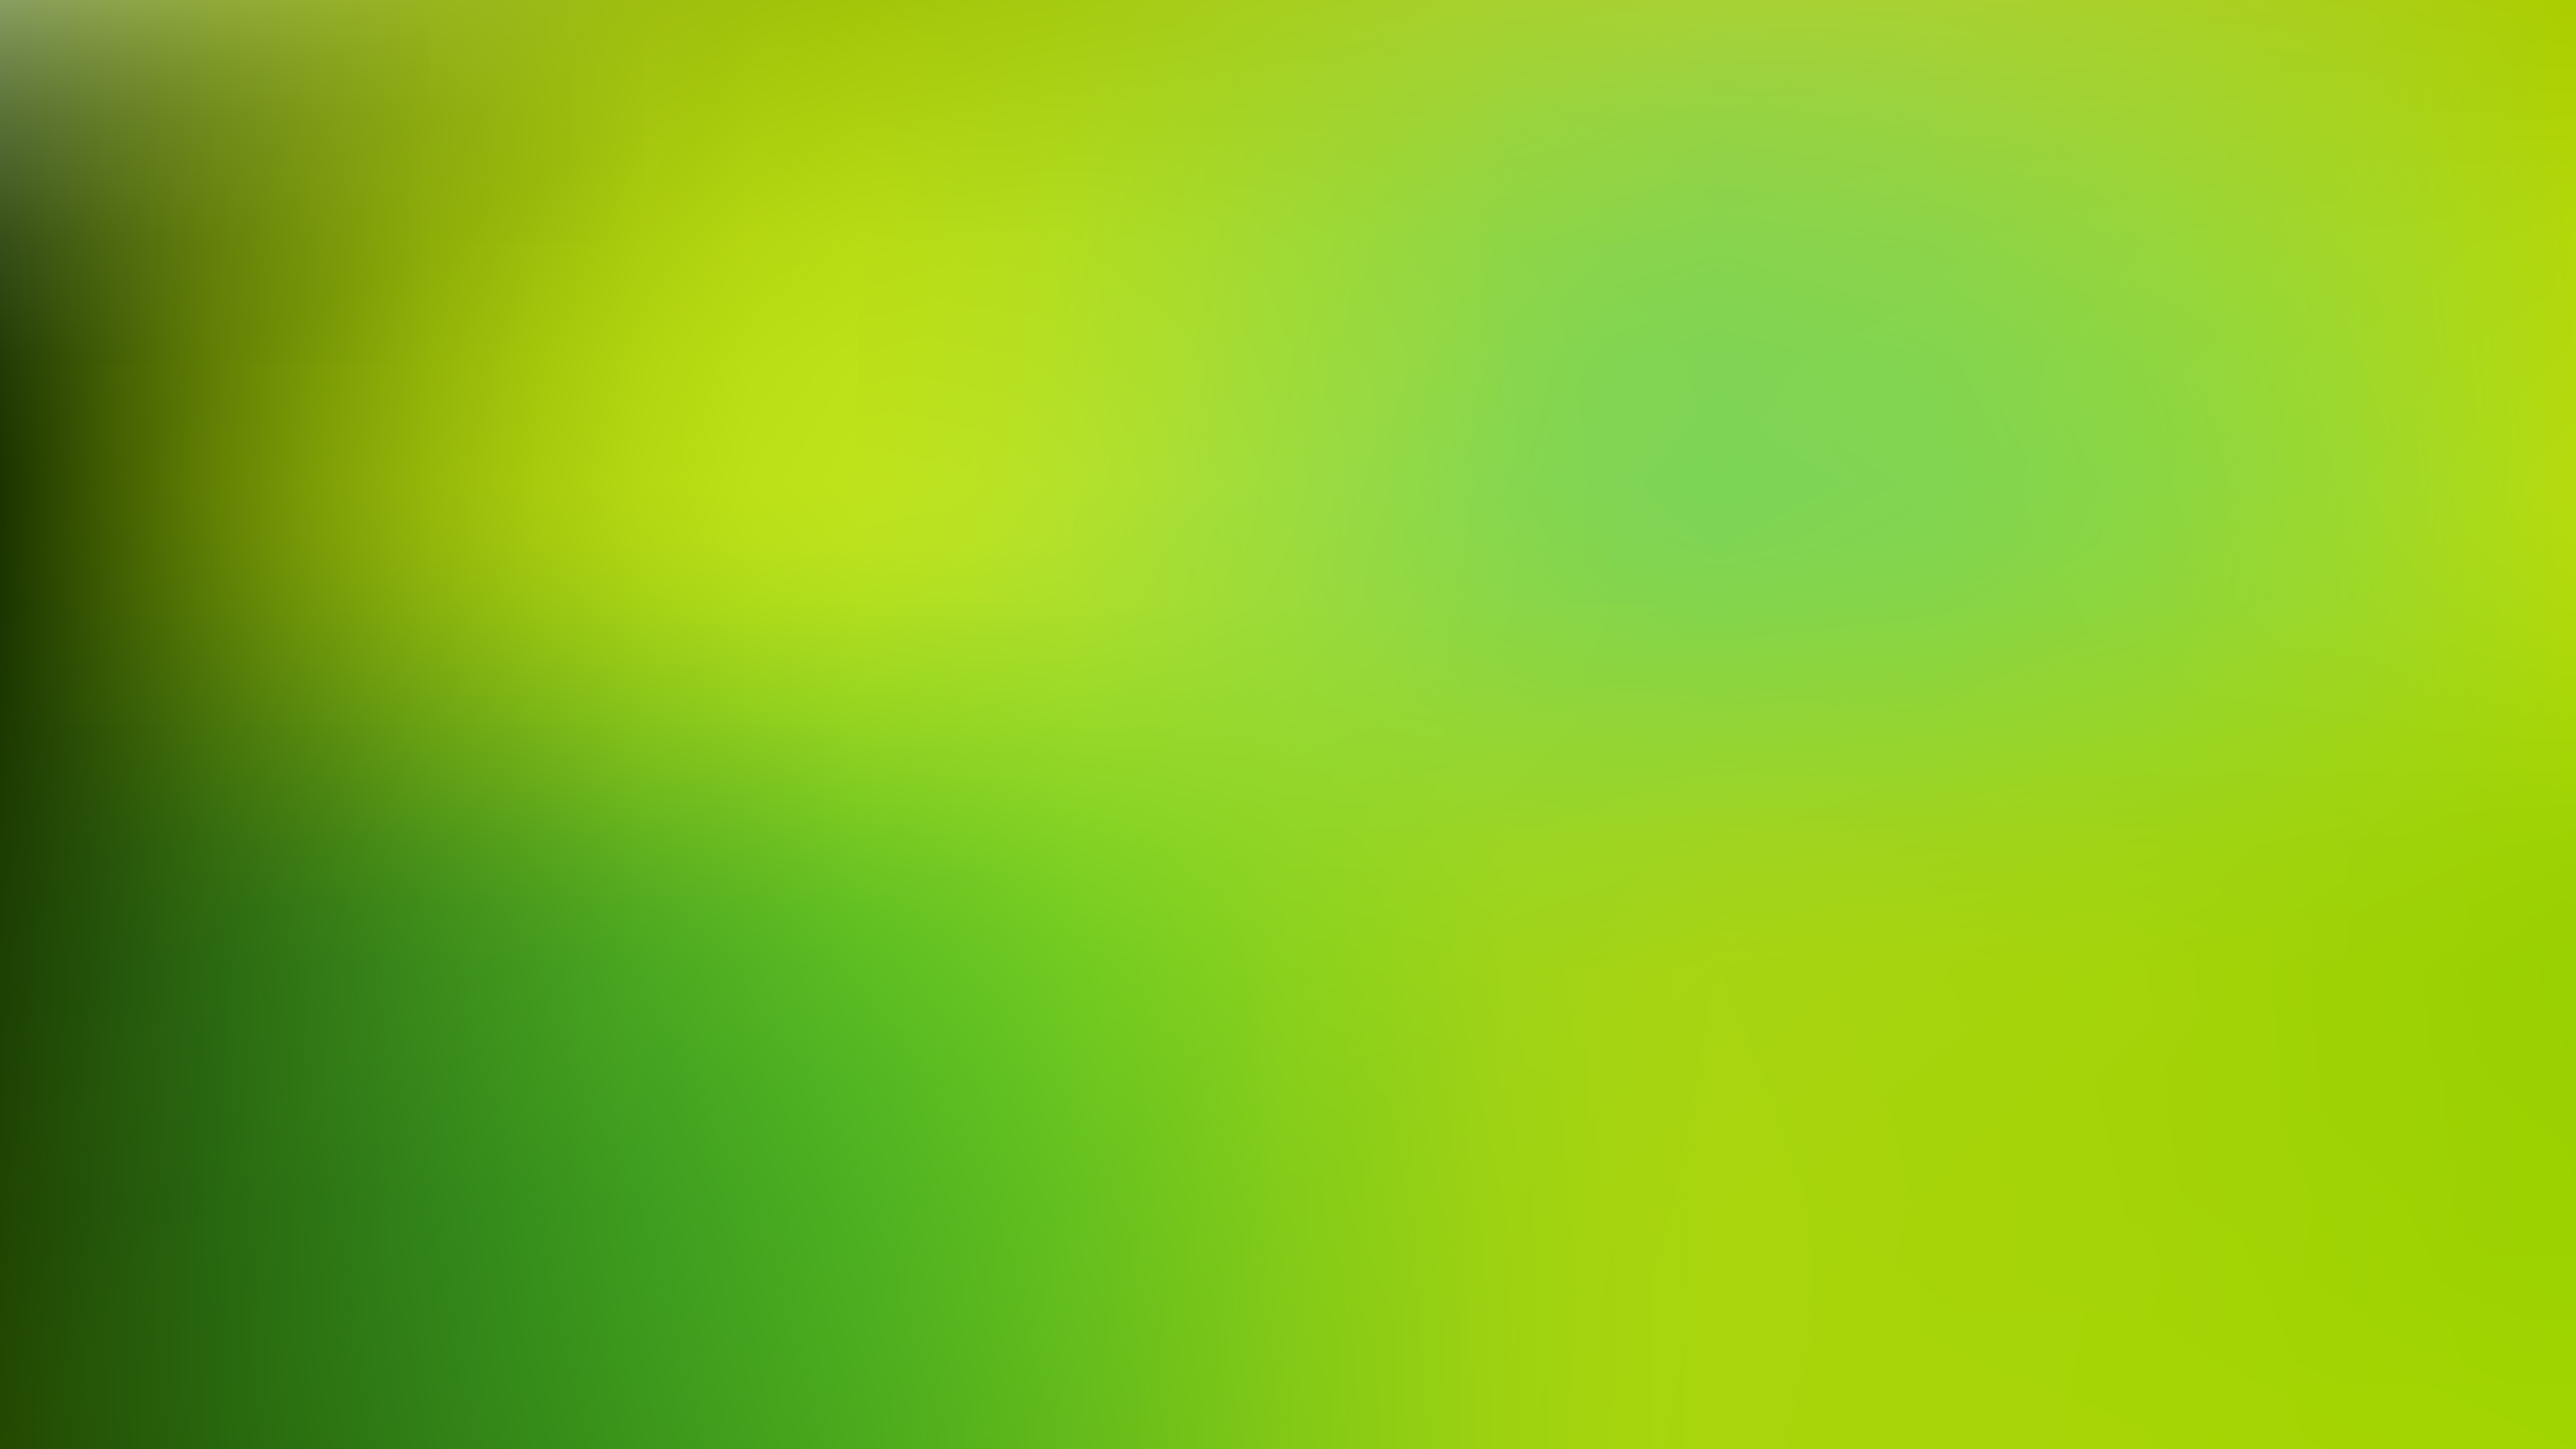 Free Green and Yellow Blurred Background